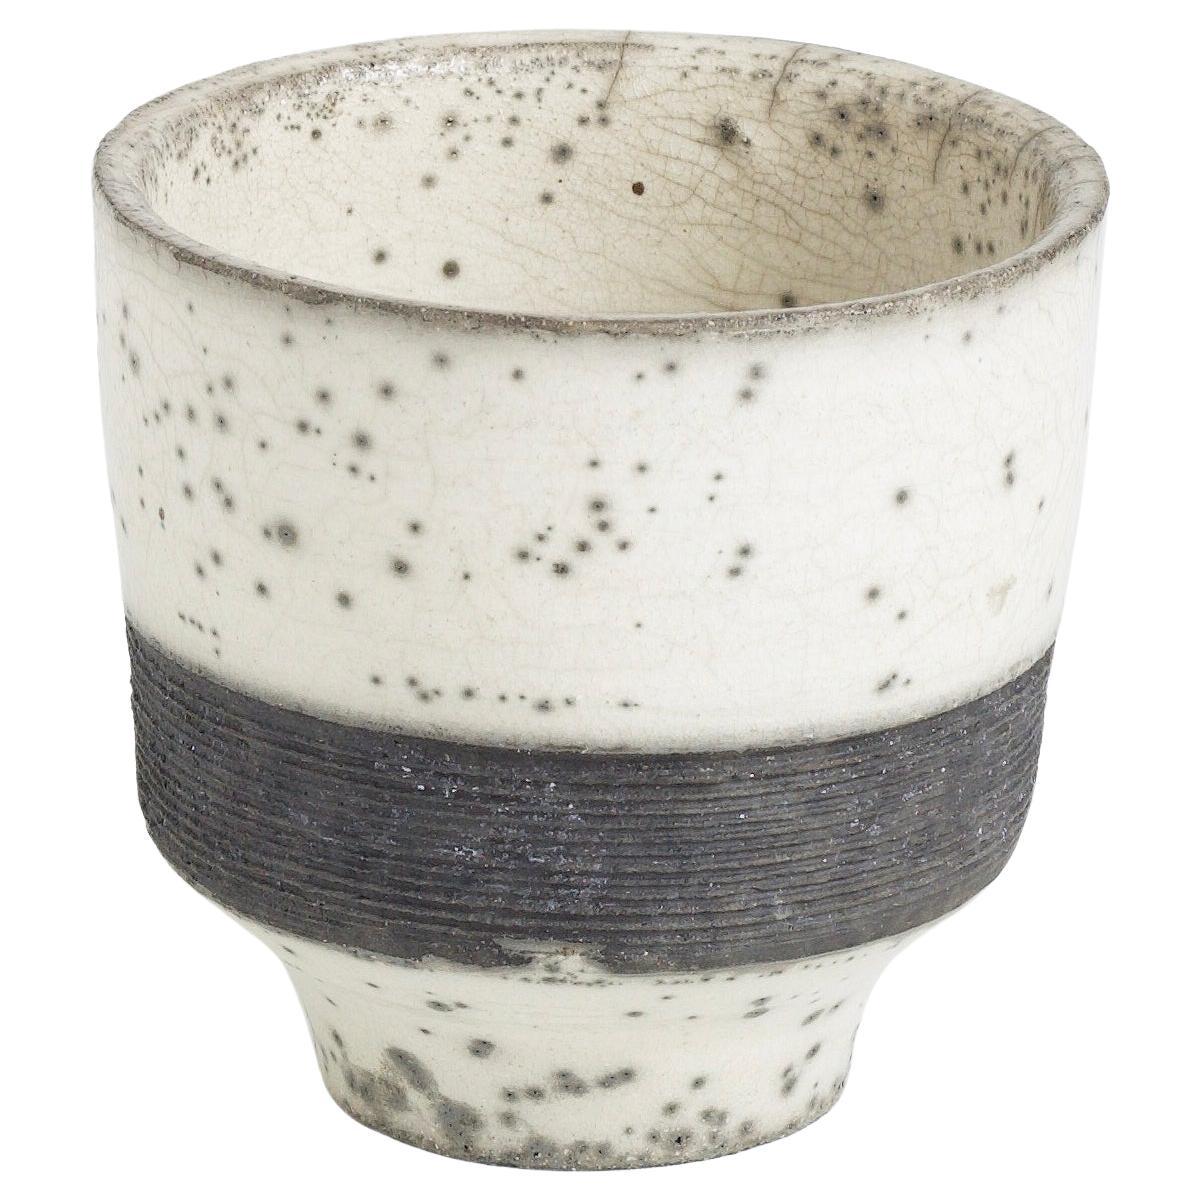 Yunomi is the taller tea cup, compared to the Chawan ( that has a usage during the tea ceremony ), which has a more formal everyday tea-drinking use. The Japanese design is elegant and exalted by the raku firing technique that enhances the surface